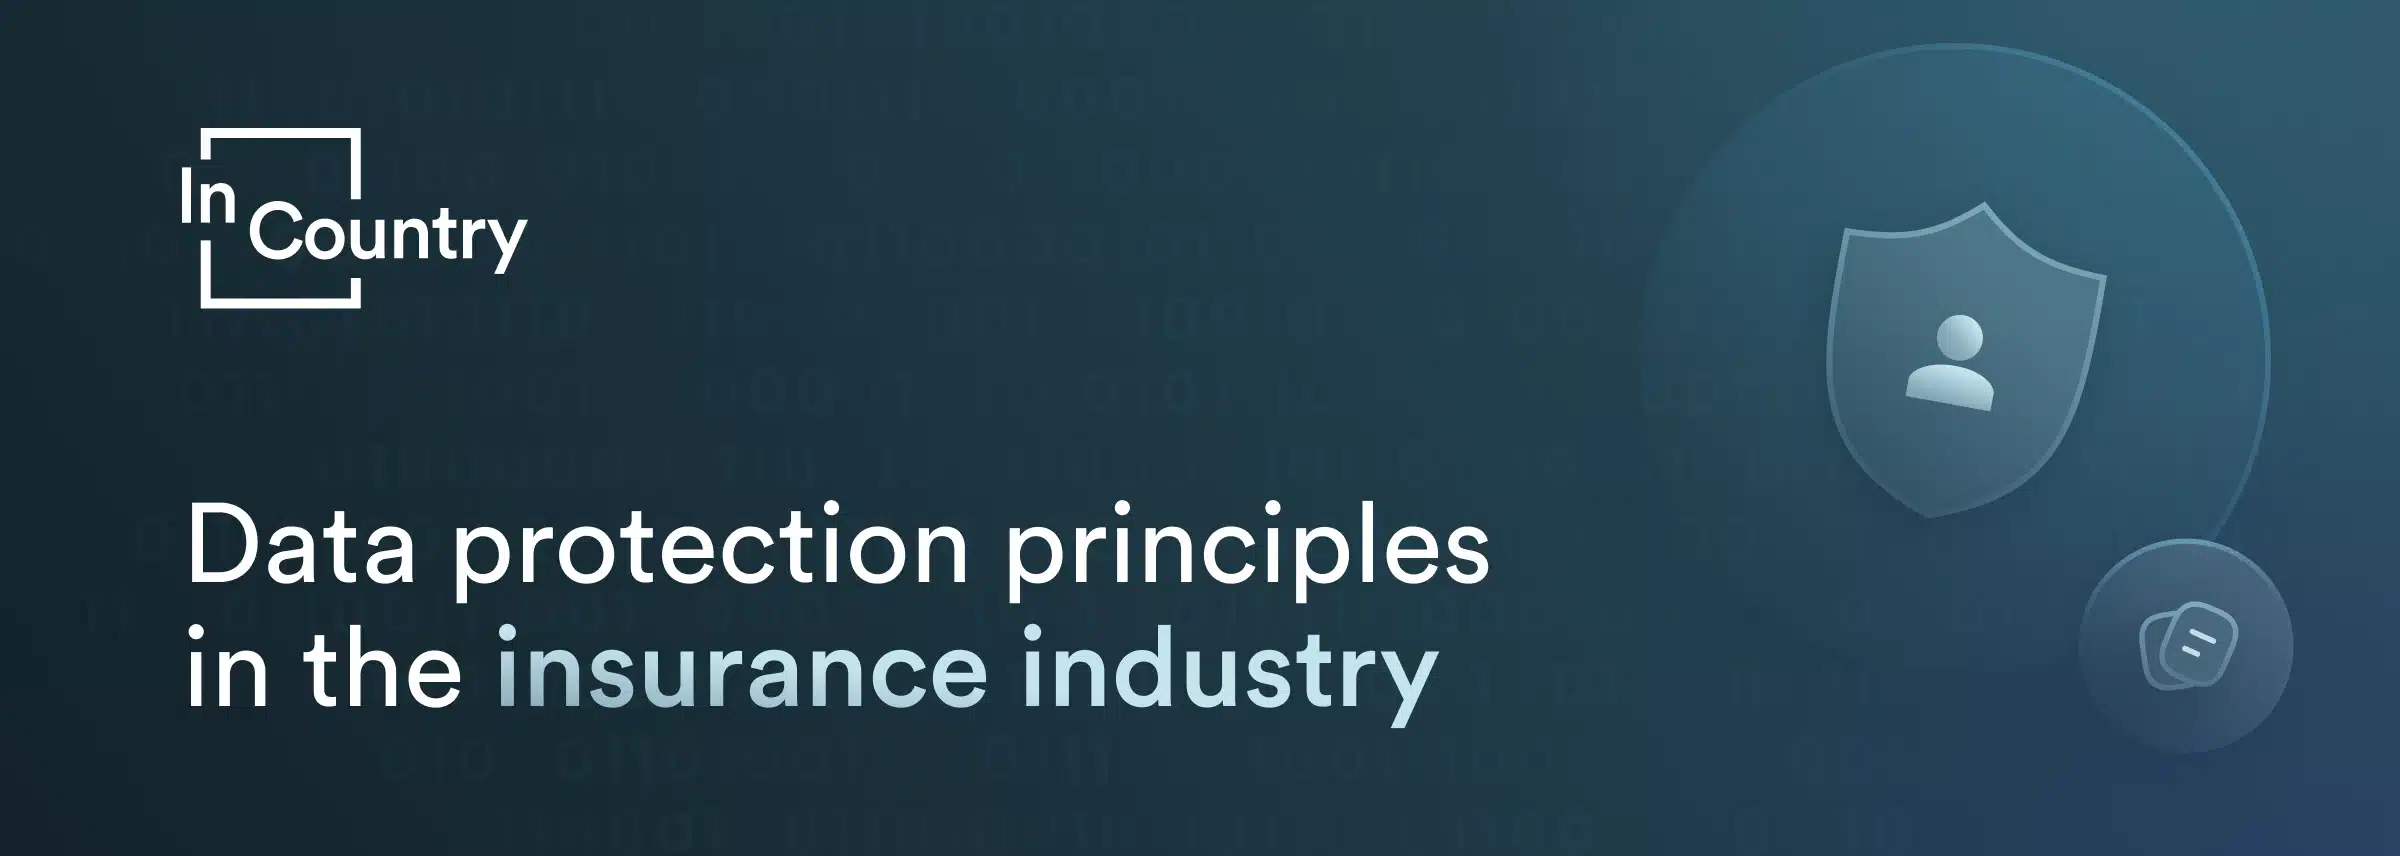 Data protection principles in the insurance industry